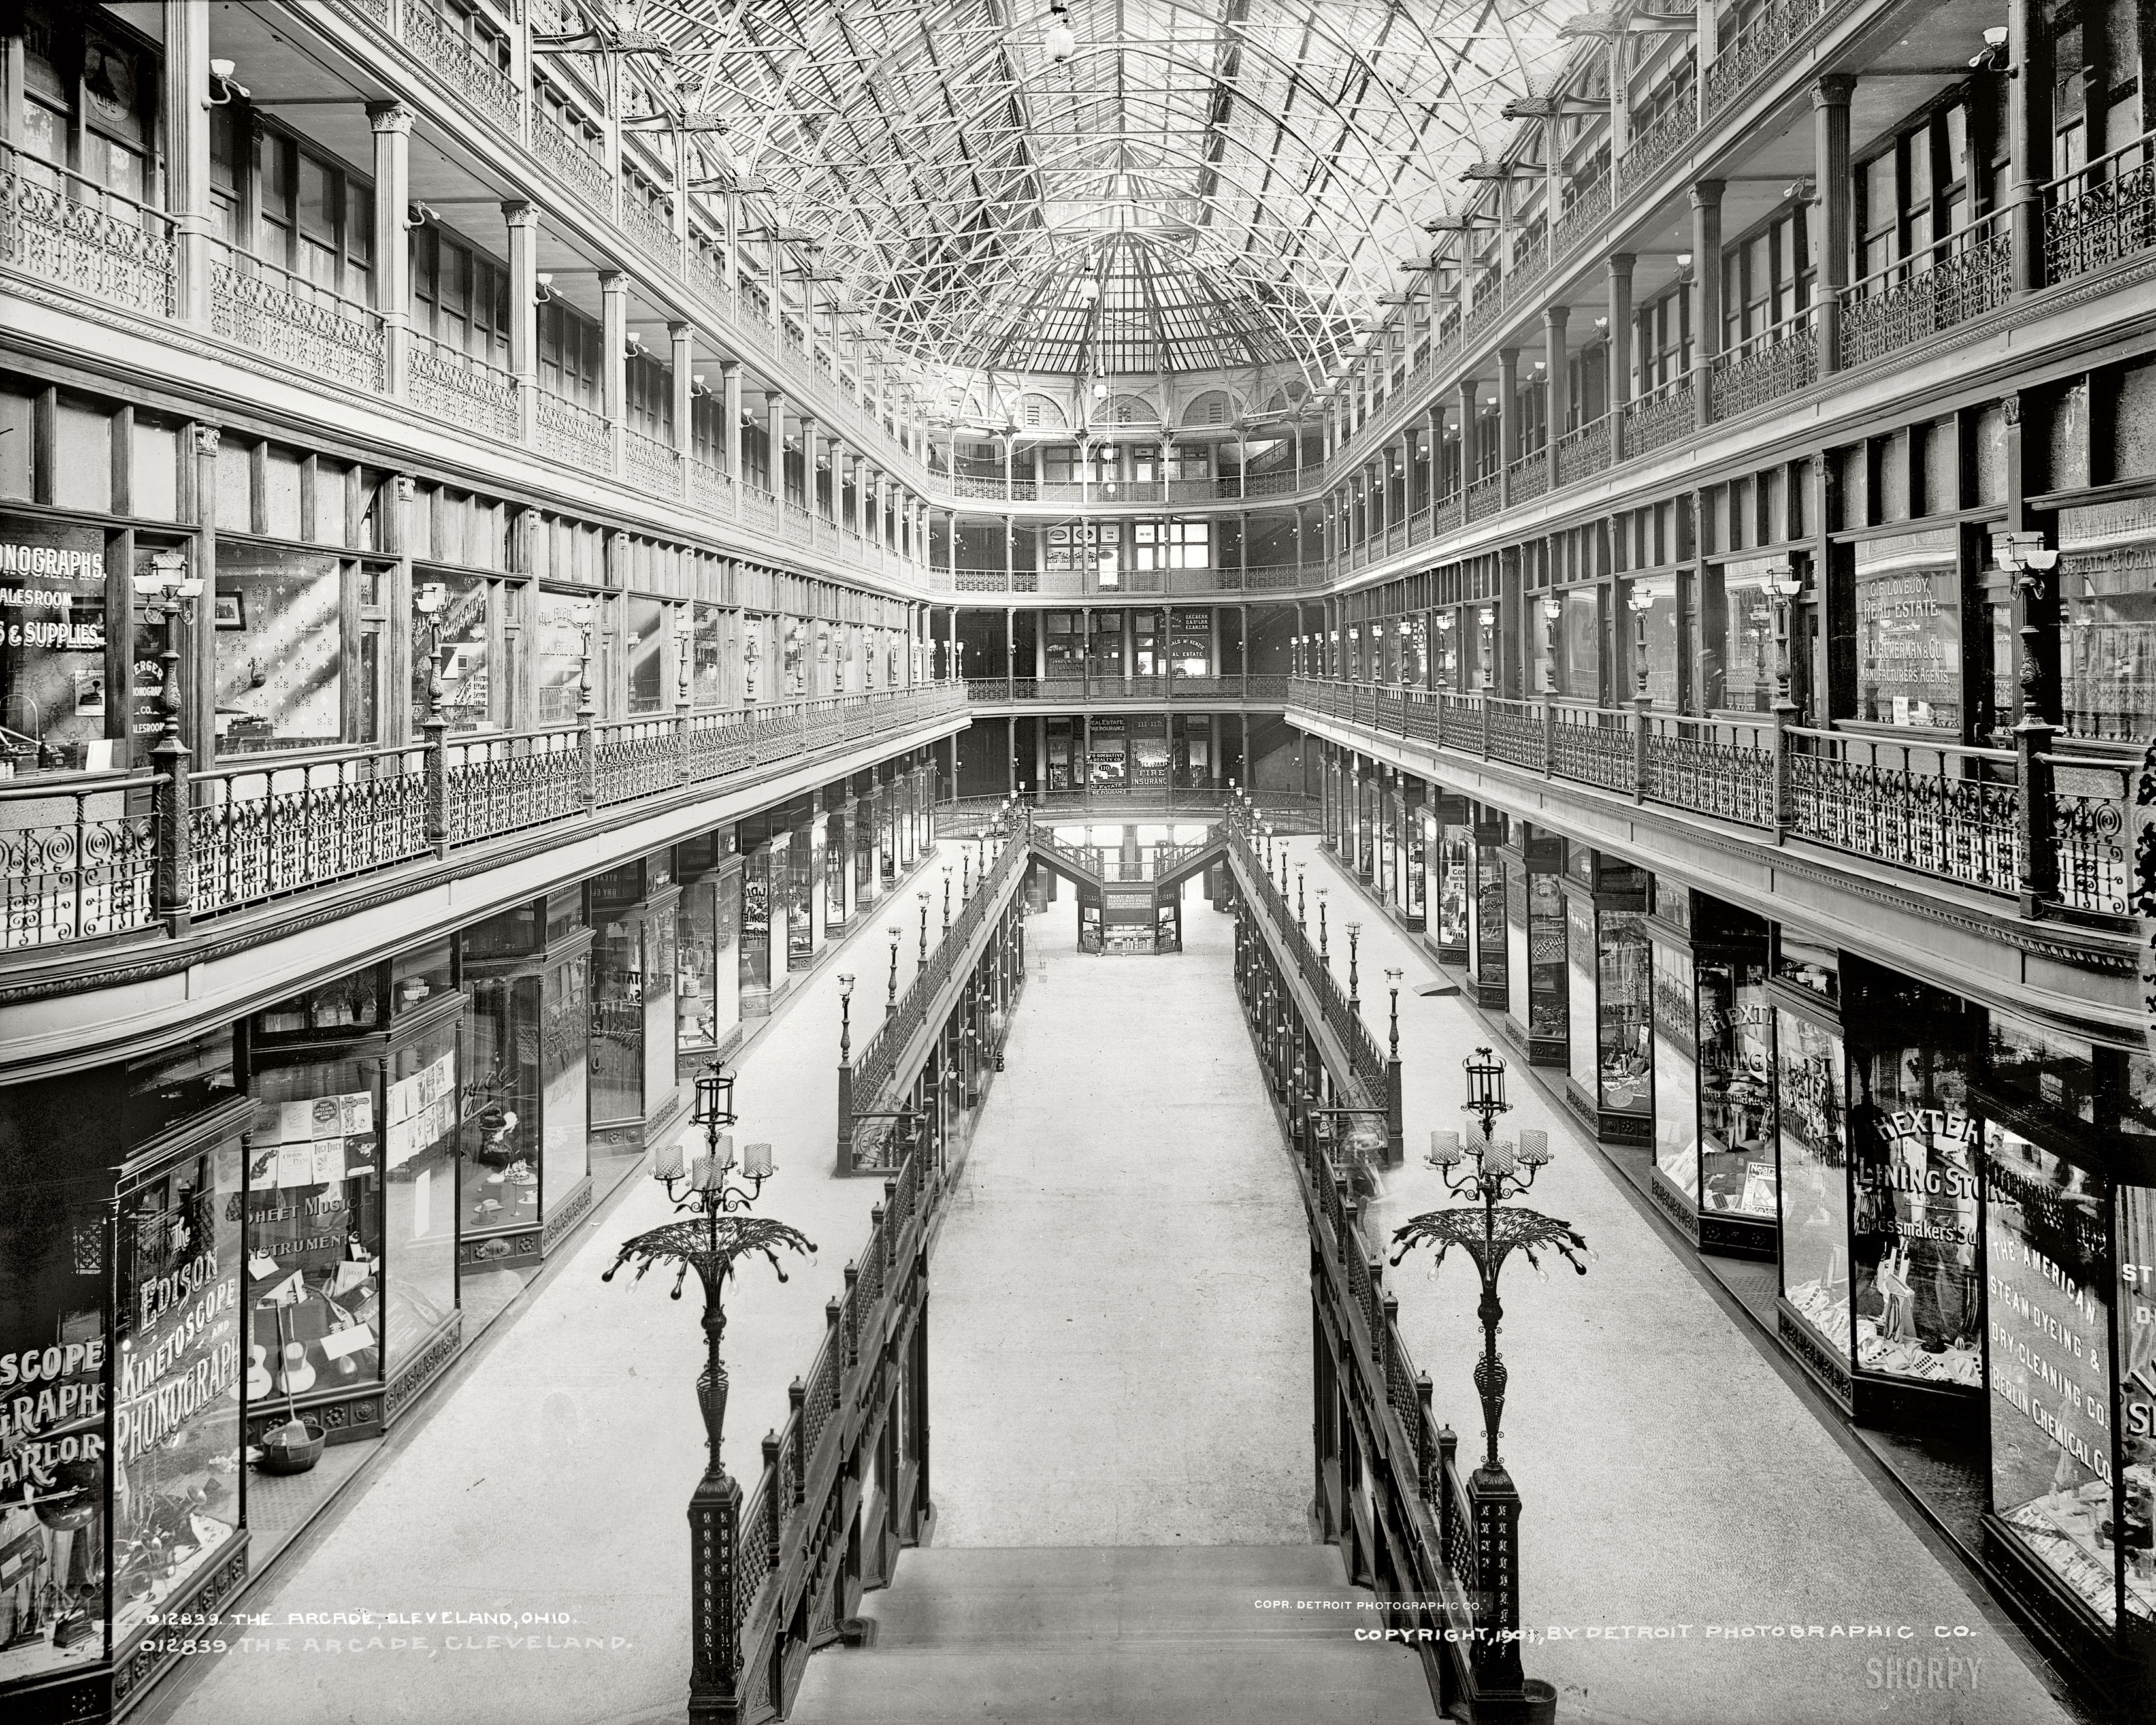 Circa 1901. "The Arcade, Cleveland." Coming soon: Cinnabon and Sunglass Hut. 8x10 dry plate glass negative, Detroit Publishing Company. View full size.